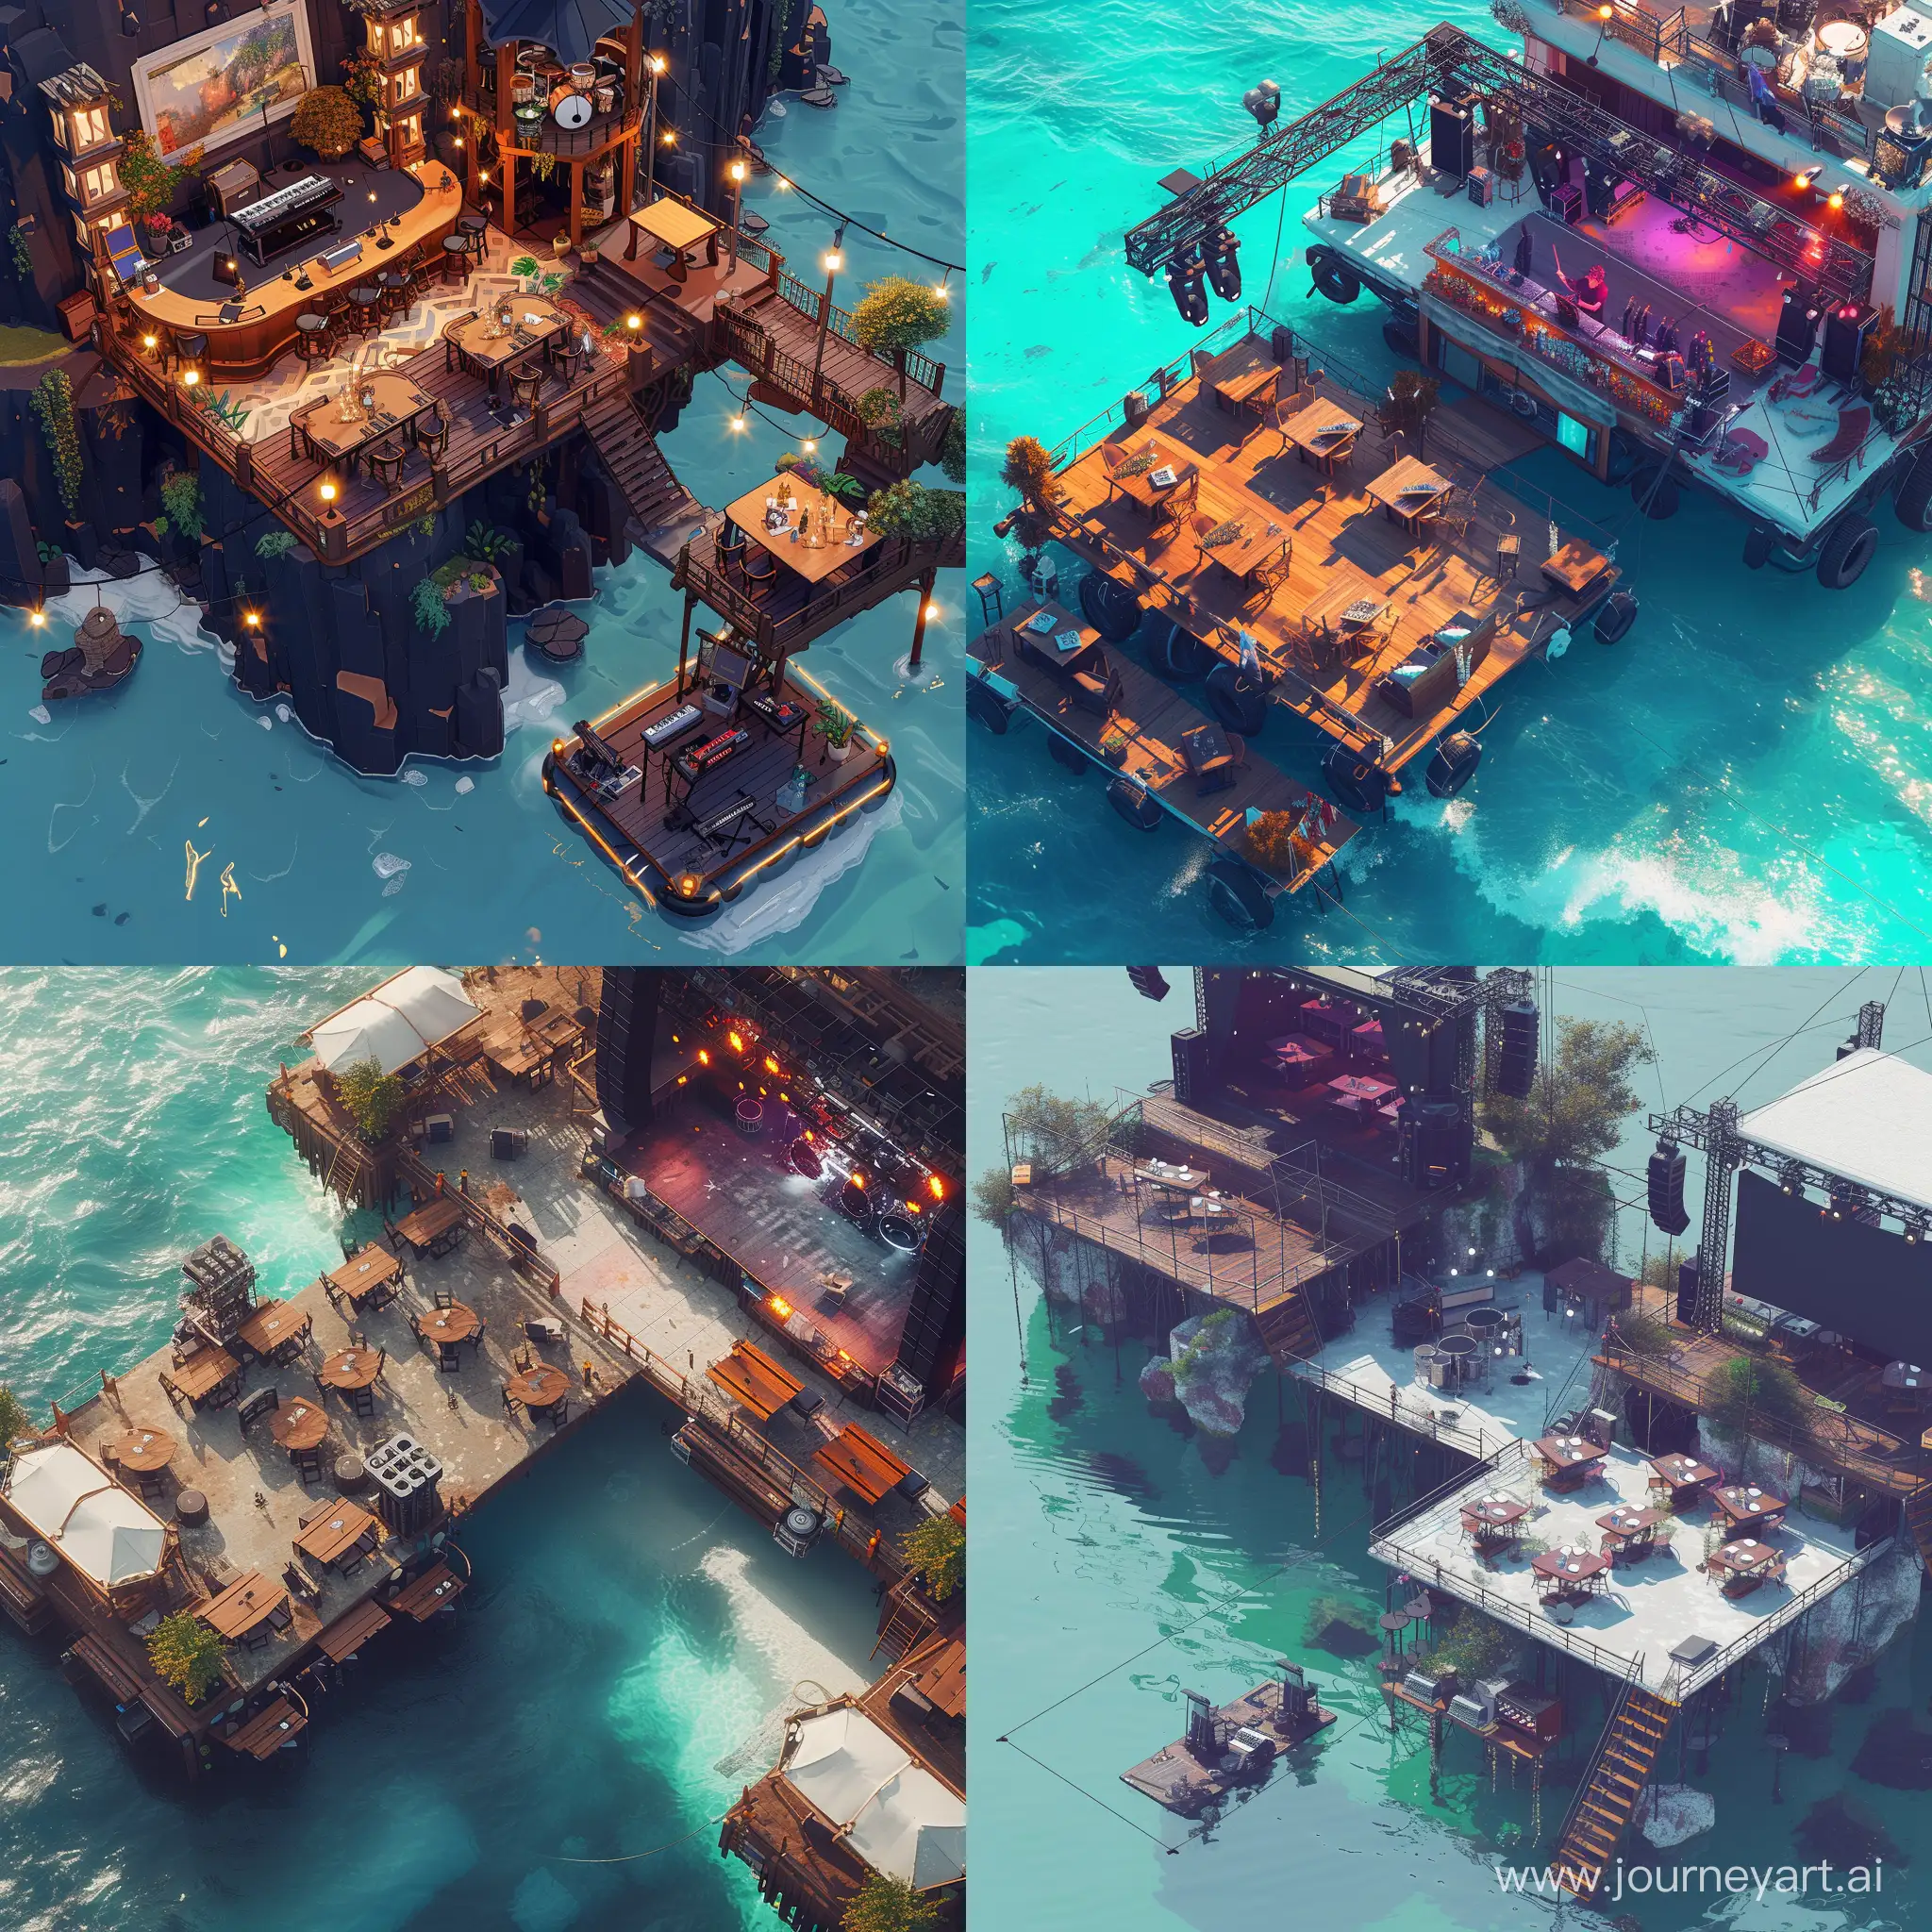 A birds eye view of a restaurant in land near sea side, with tables and desk outside, looking at the sea side, connected to a floating stage, with live bands, and a floating bar, ultra detailed, aesthetic, chill vibes